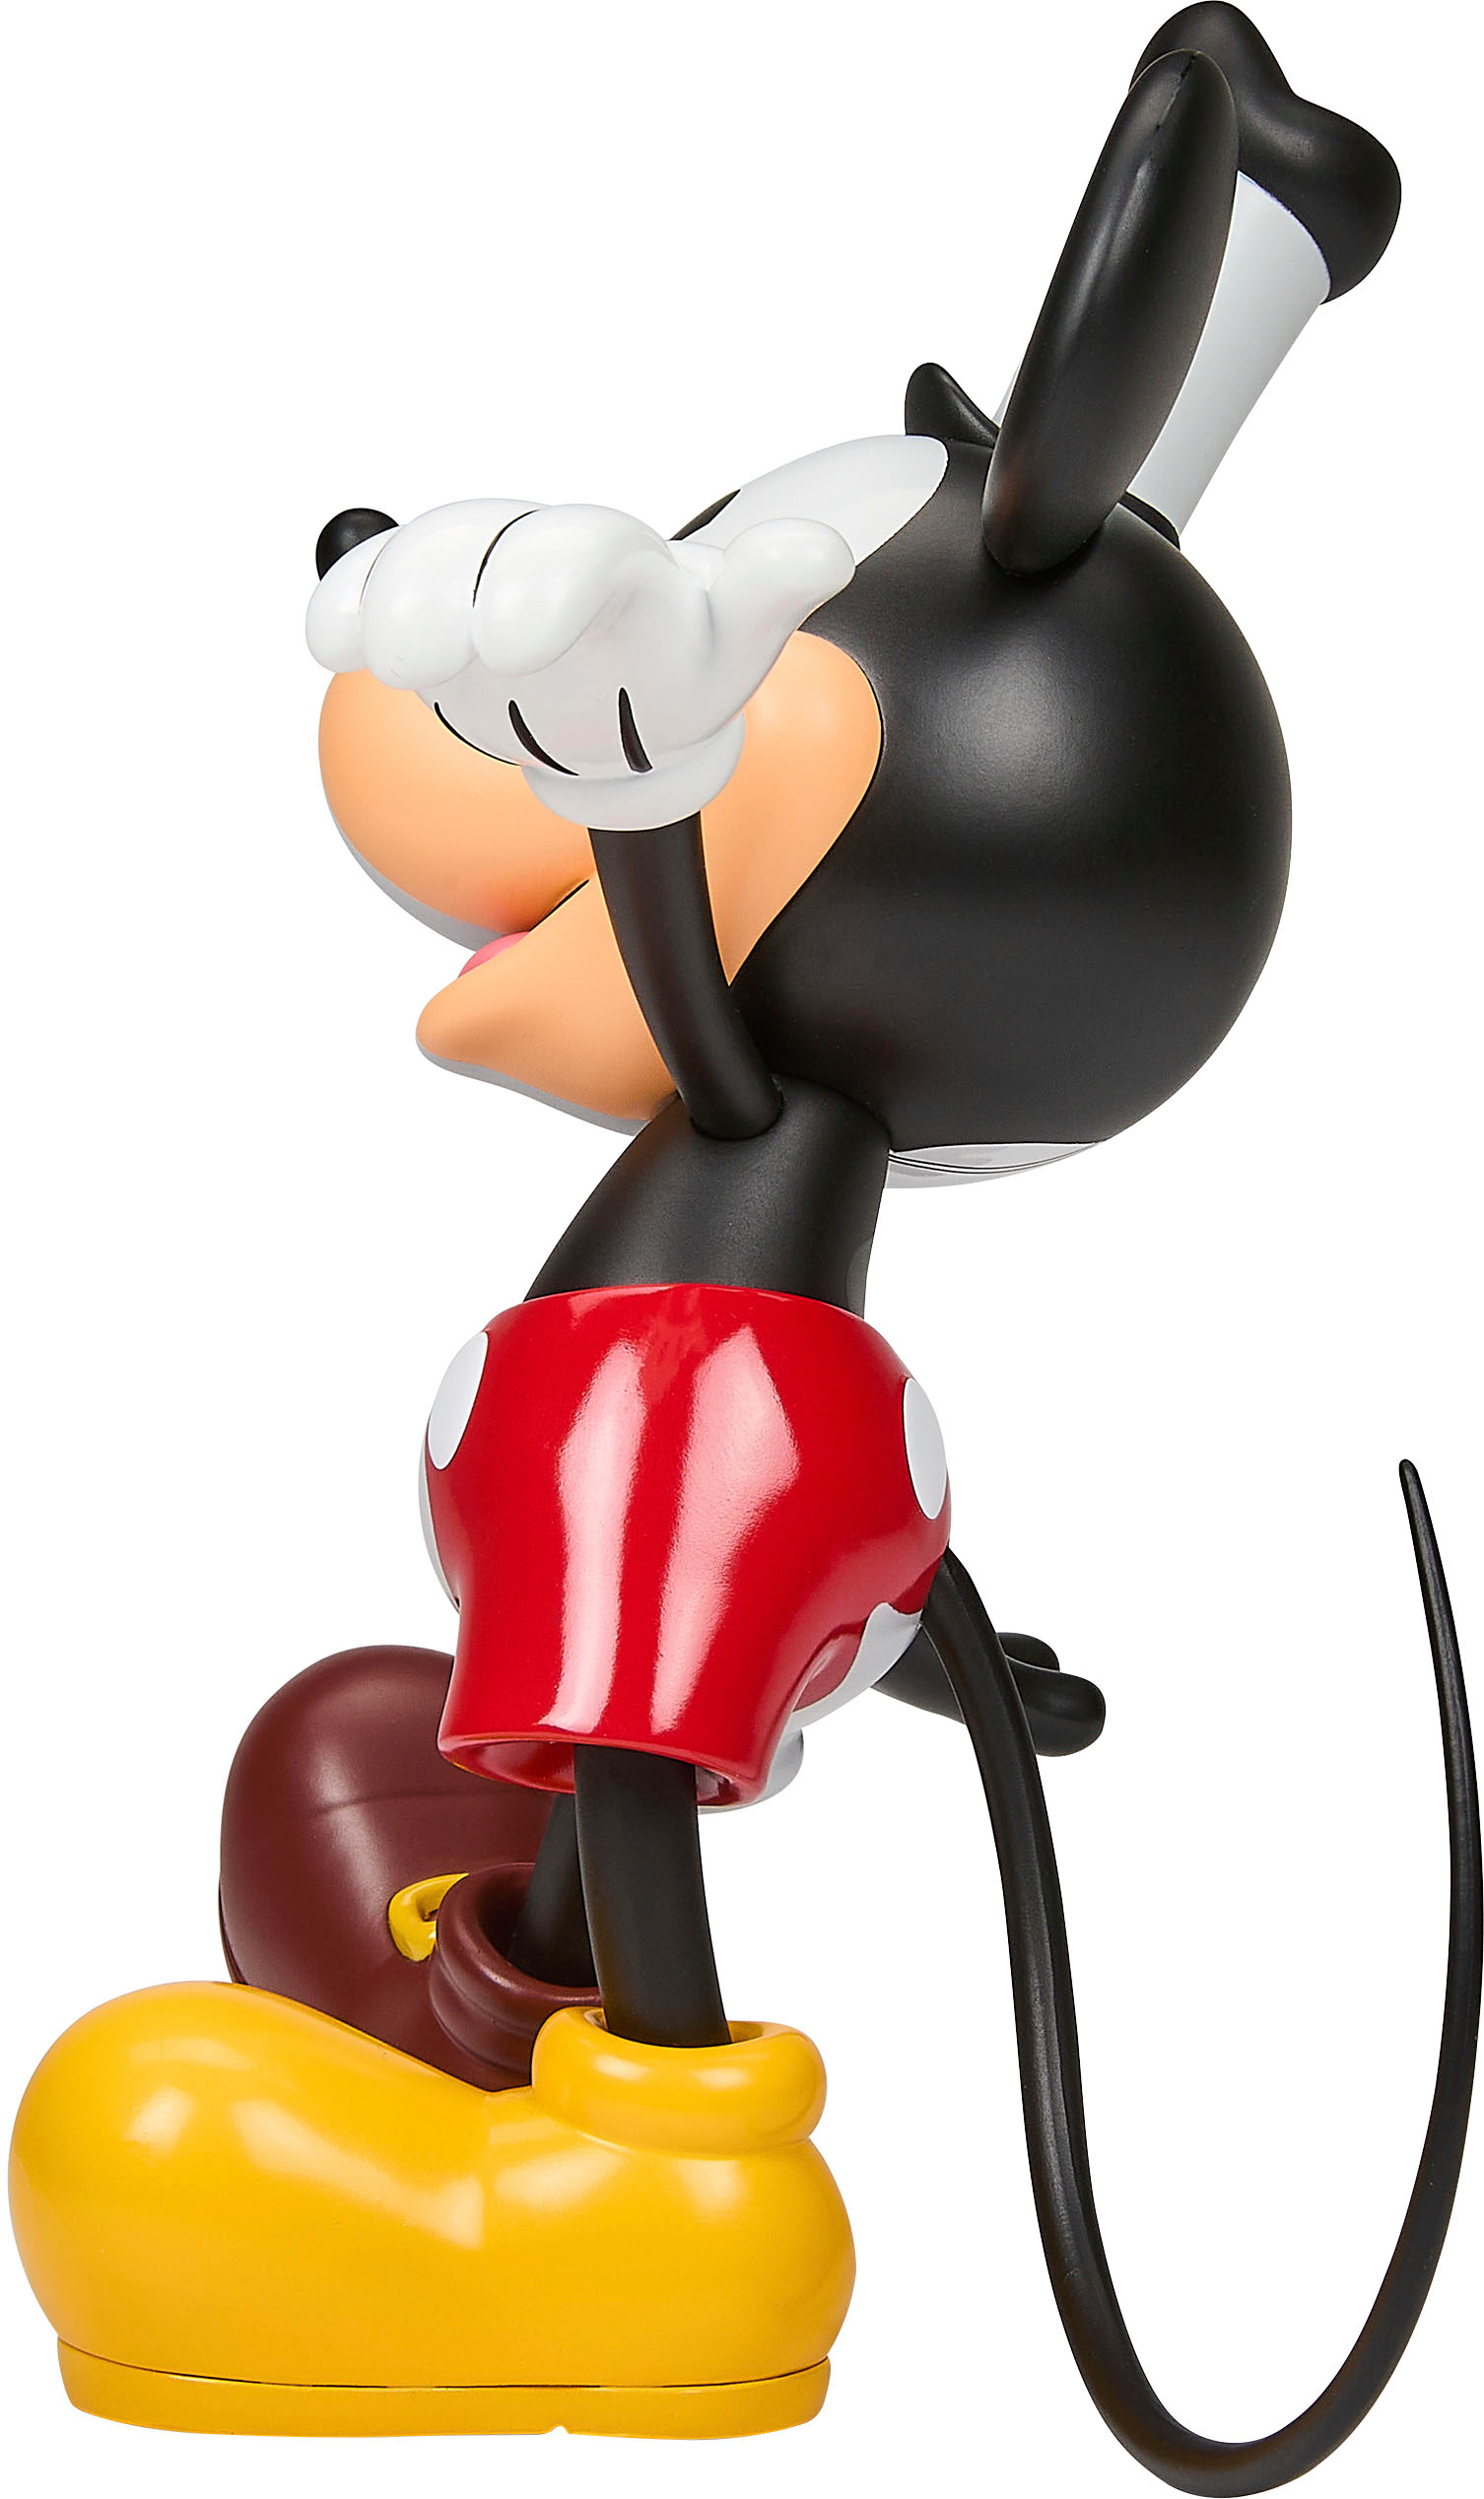 Disney D100 Celebration Pack Collectible Action Figures Minnie Mouse & Mickey  Mouse HPB33 - Best Buy